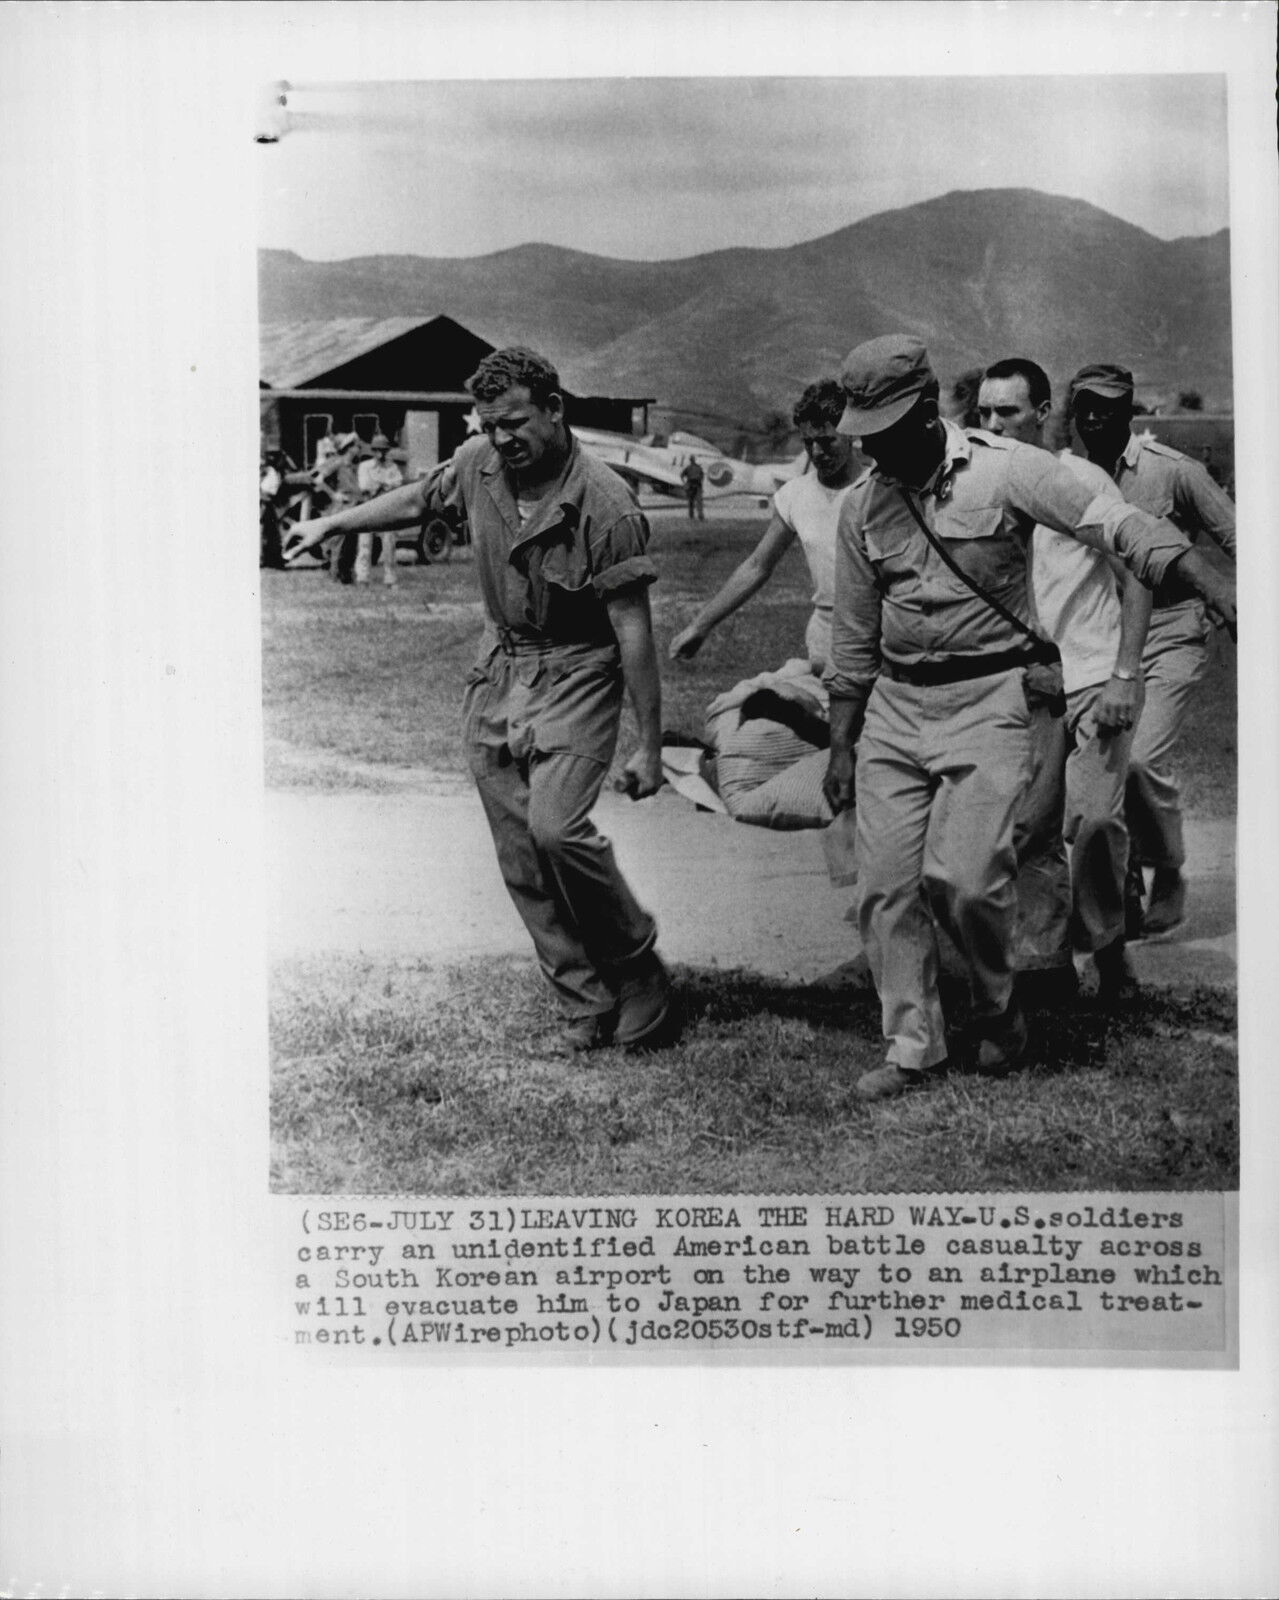 Wounded Head For Japan By Airplane 1950 Korea War Press Photo Poster painting